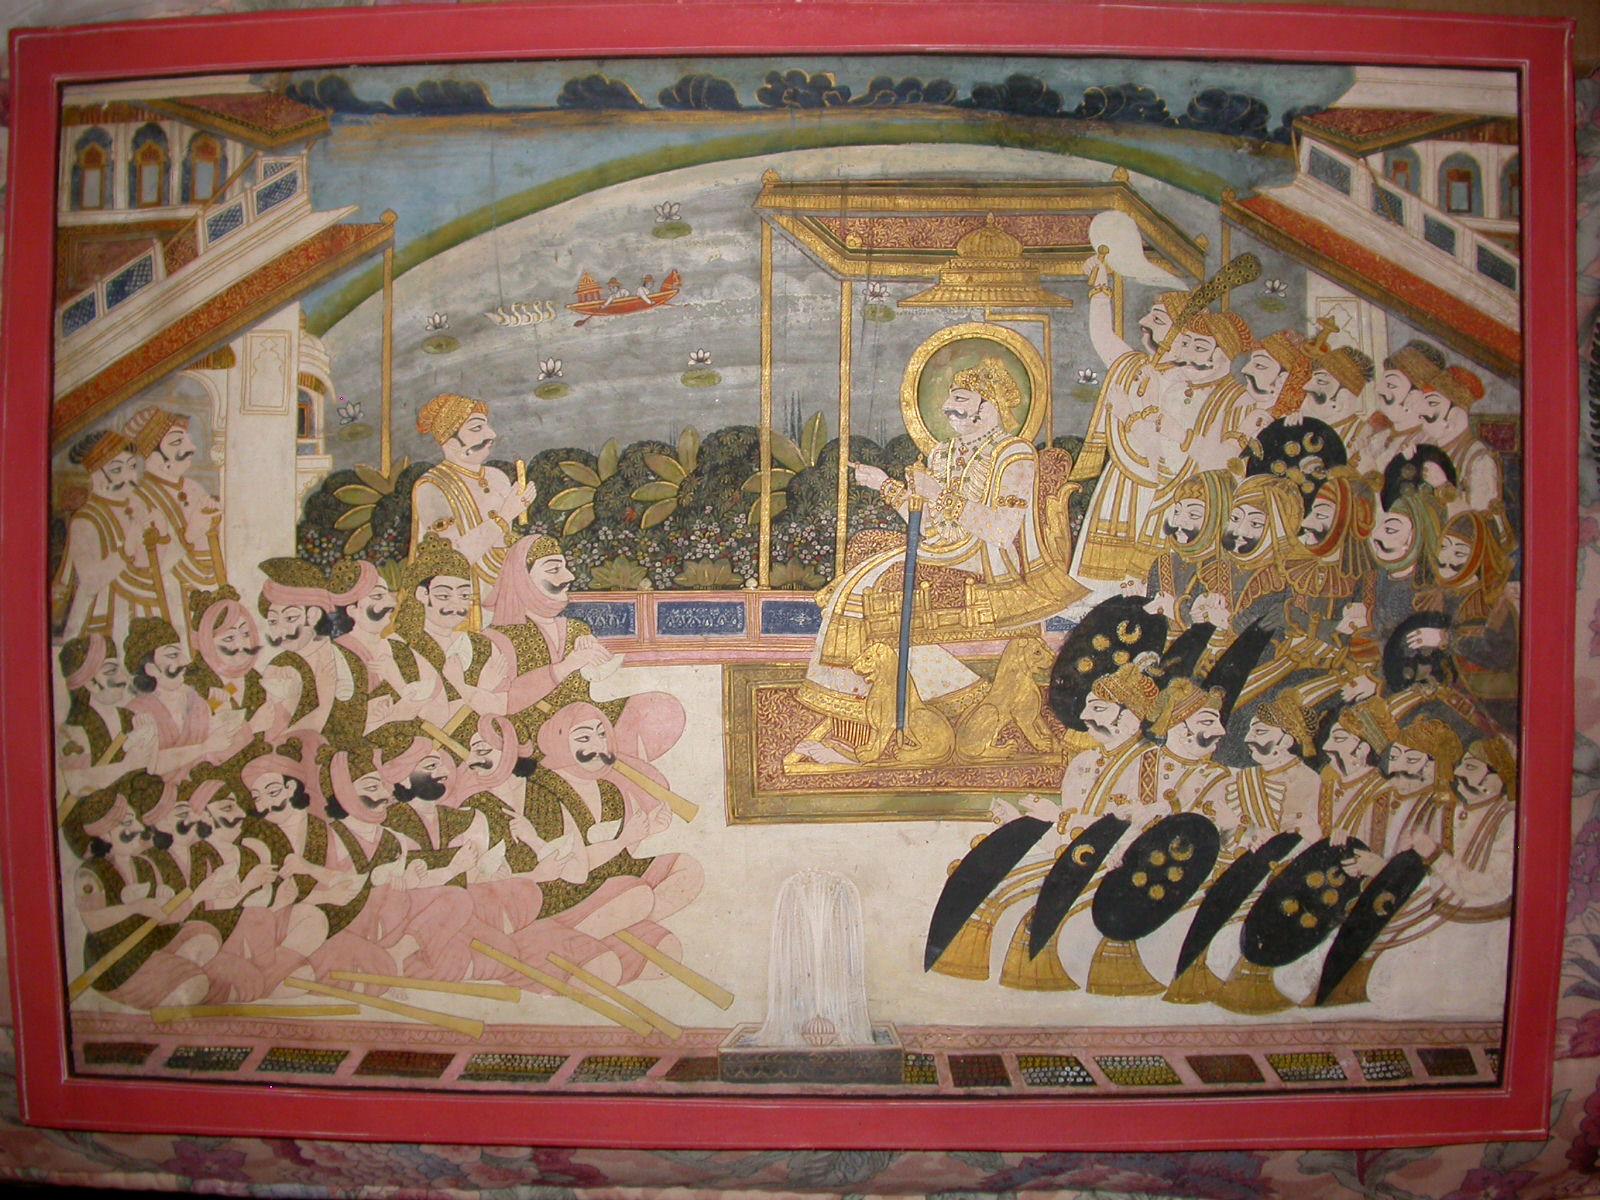 A painting showing a maharaja sitting on a terrace in front of a garden and lake surrounded by nobles, courtiers, and warriors.